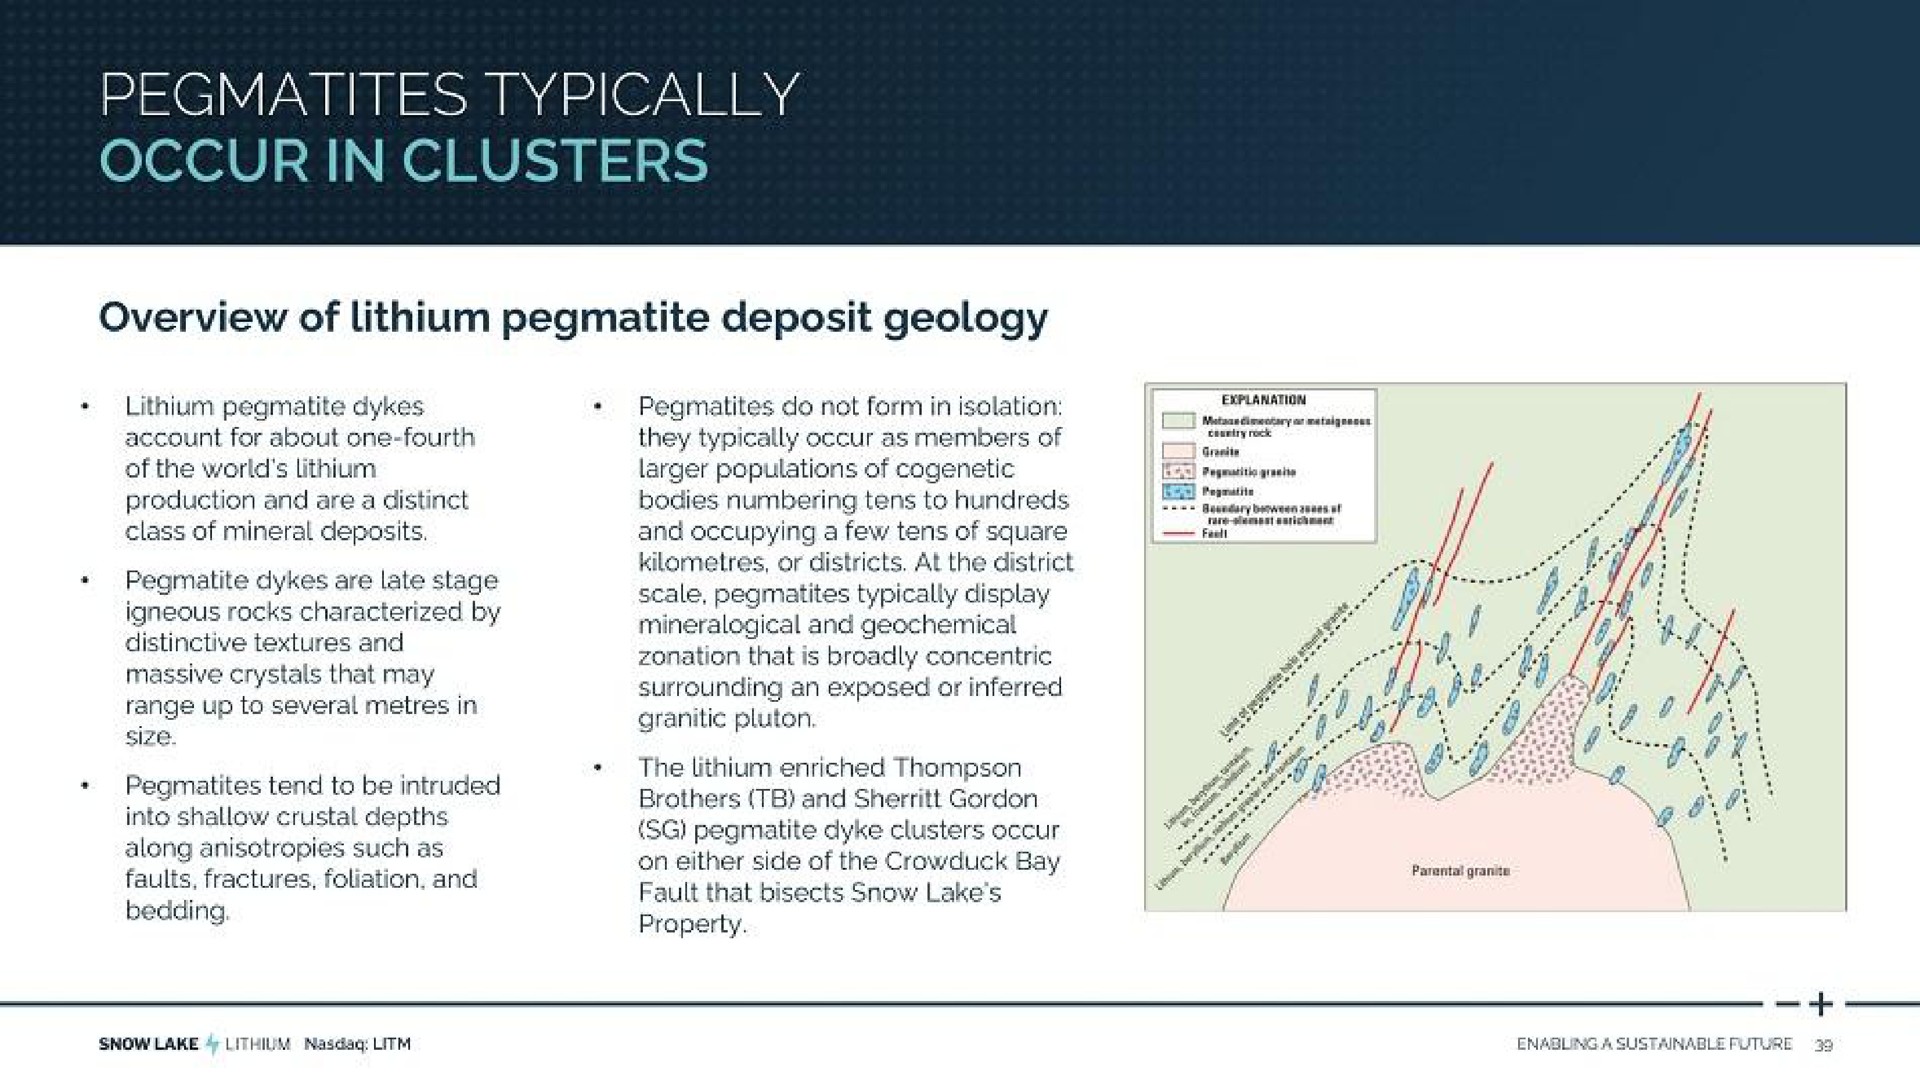 blessed occur in clusters ley | Snow Lake Resources